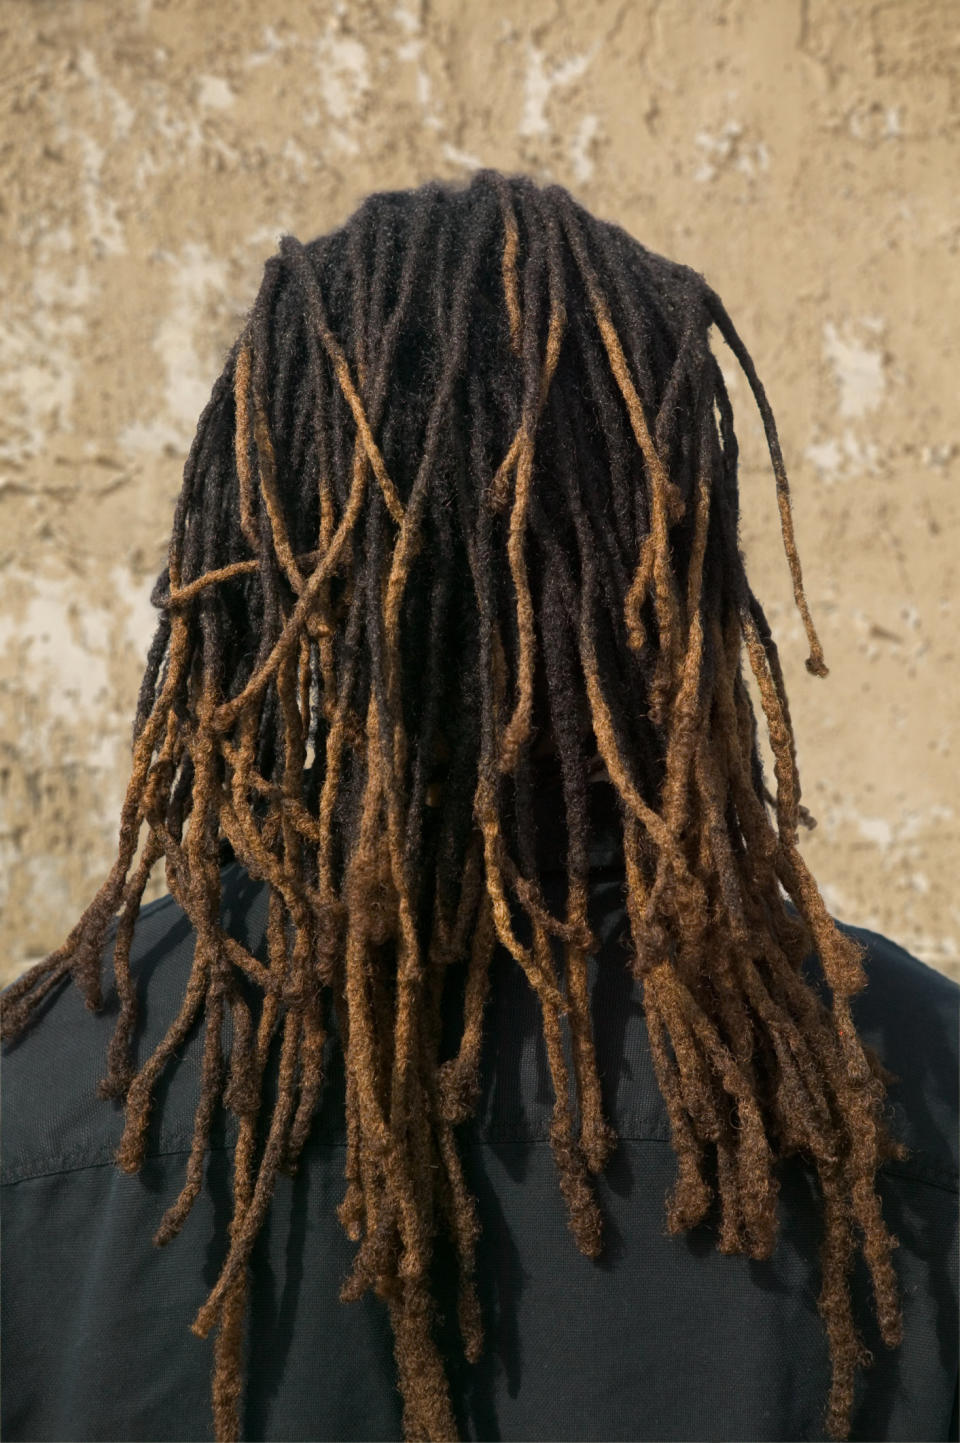 A Louisiana school district kicked&nbsp;a student who practices the&nbsp;Rastafarian faith out of school for <a href="http://www.huffingtonpost.com/2014/08/26/south-plaquemines-rastafarian-student_n_5717489.html">wearing dreadlocks</a> in 2014. He was able to return after the American Civil Liberties Union <a href="http://atlantablackstar.com/2014/10/30/6-ridiculous-reasons-black-students-have-been-suspended-from-school/5/">came to his defense</a>.&nbsp;